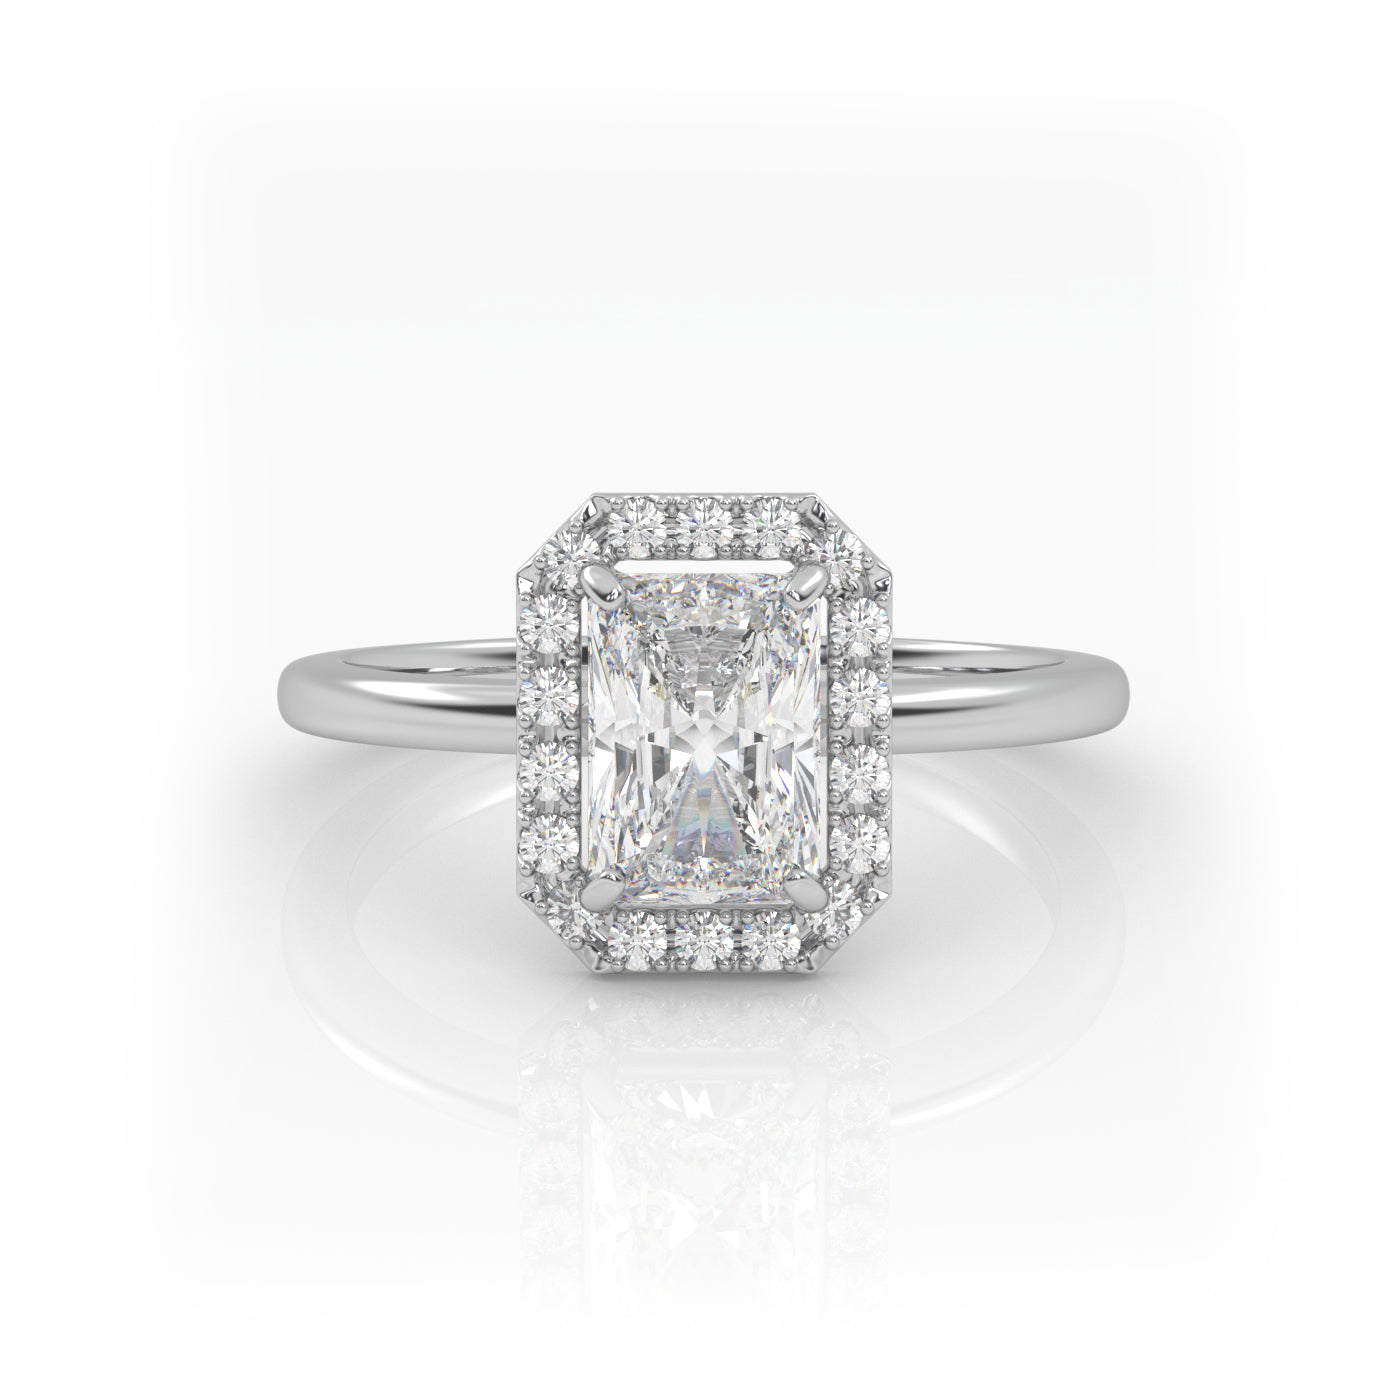 The Radiant Solitaire with Halo